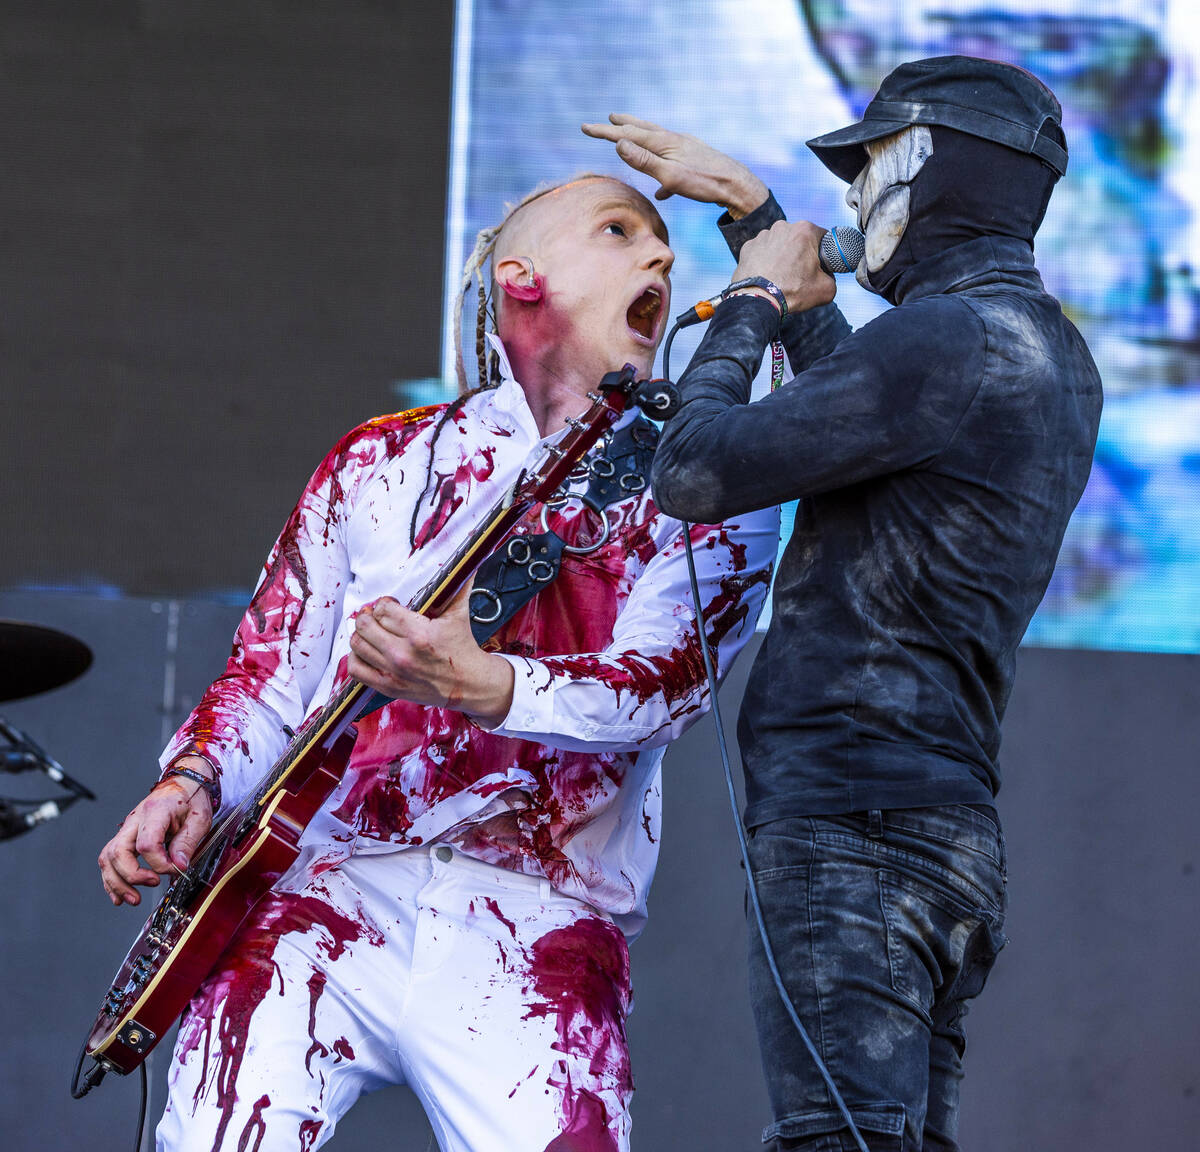 Skinny Puppy Guitarist Matthew Setzer and lead singer Nivek Ogre perform during the Sick New Wo ...